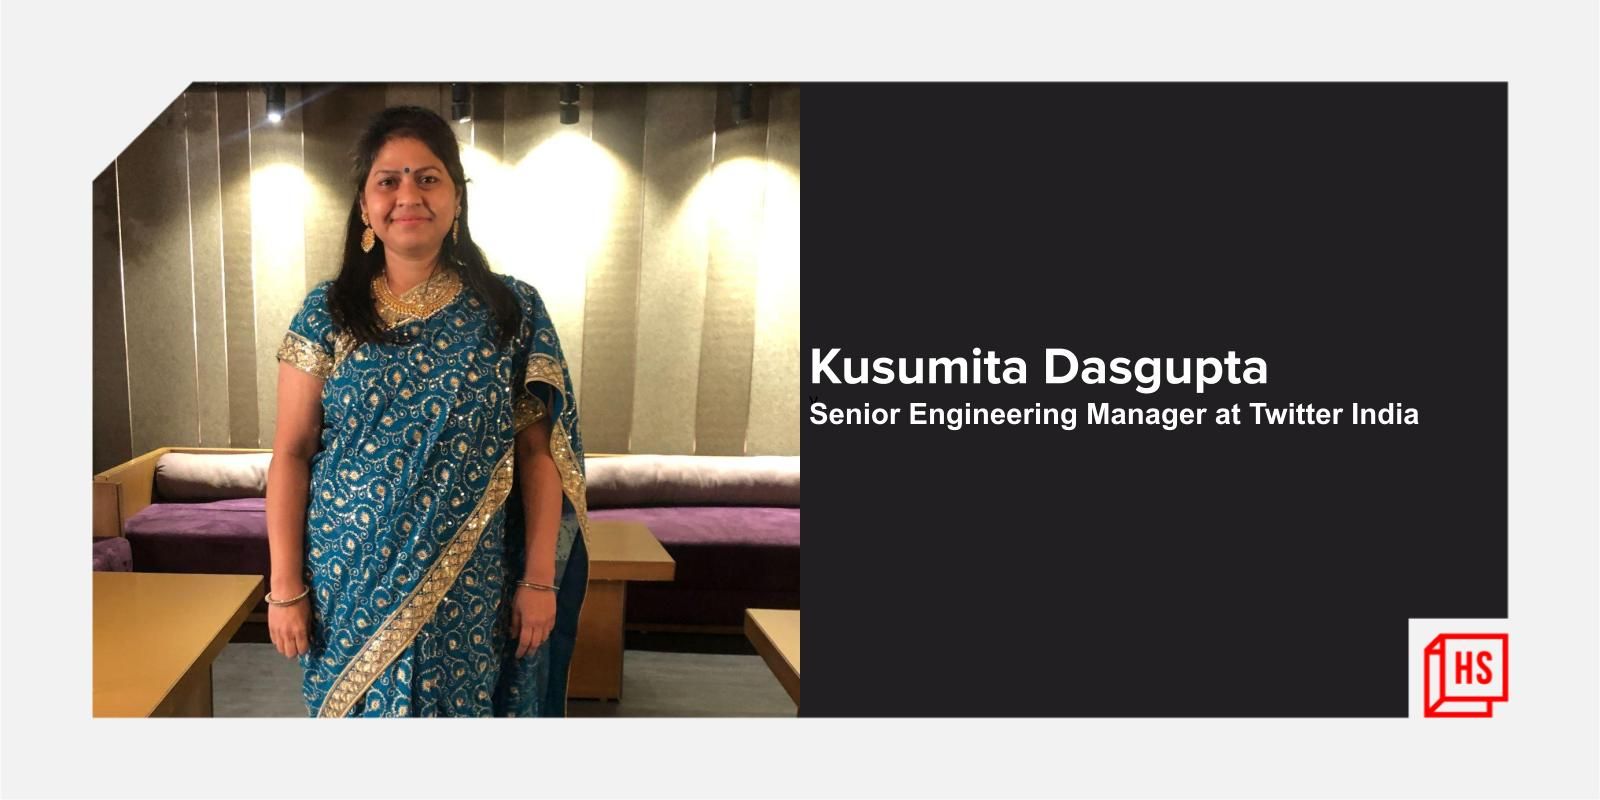 Women are an indispensable and ever-growing part of the tech landscape, says Twitter India’s Kusumita Dasgupta 
